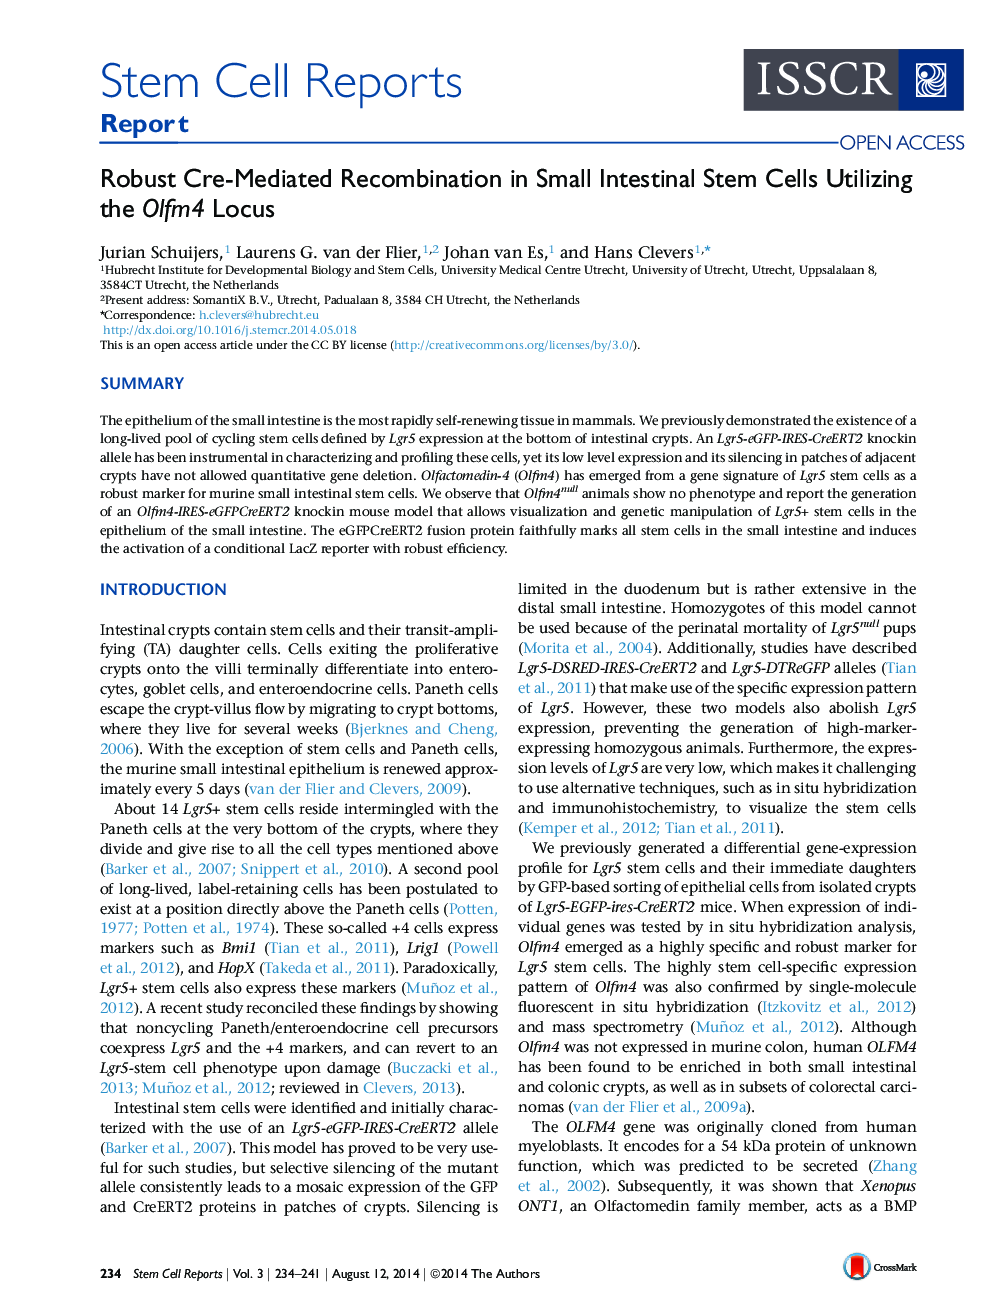 Robust Cre-Mediated Recombination in Small Intestinal Stem Cells Utilizing the Olfm4 Locus 